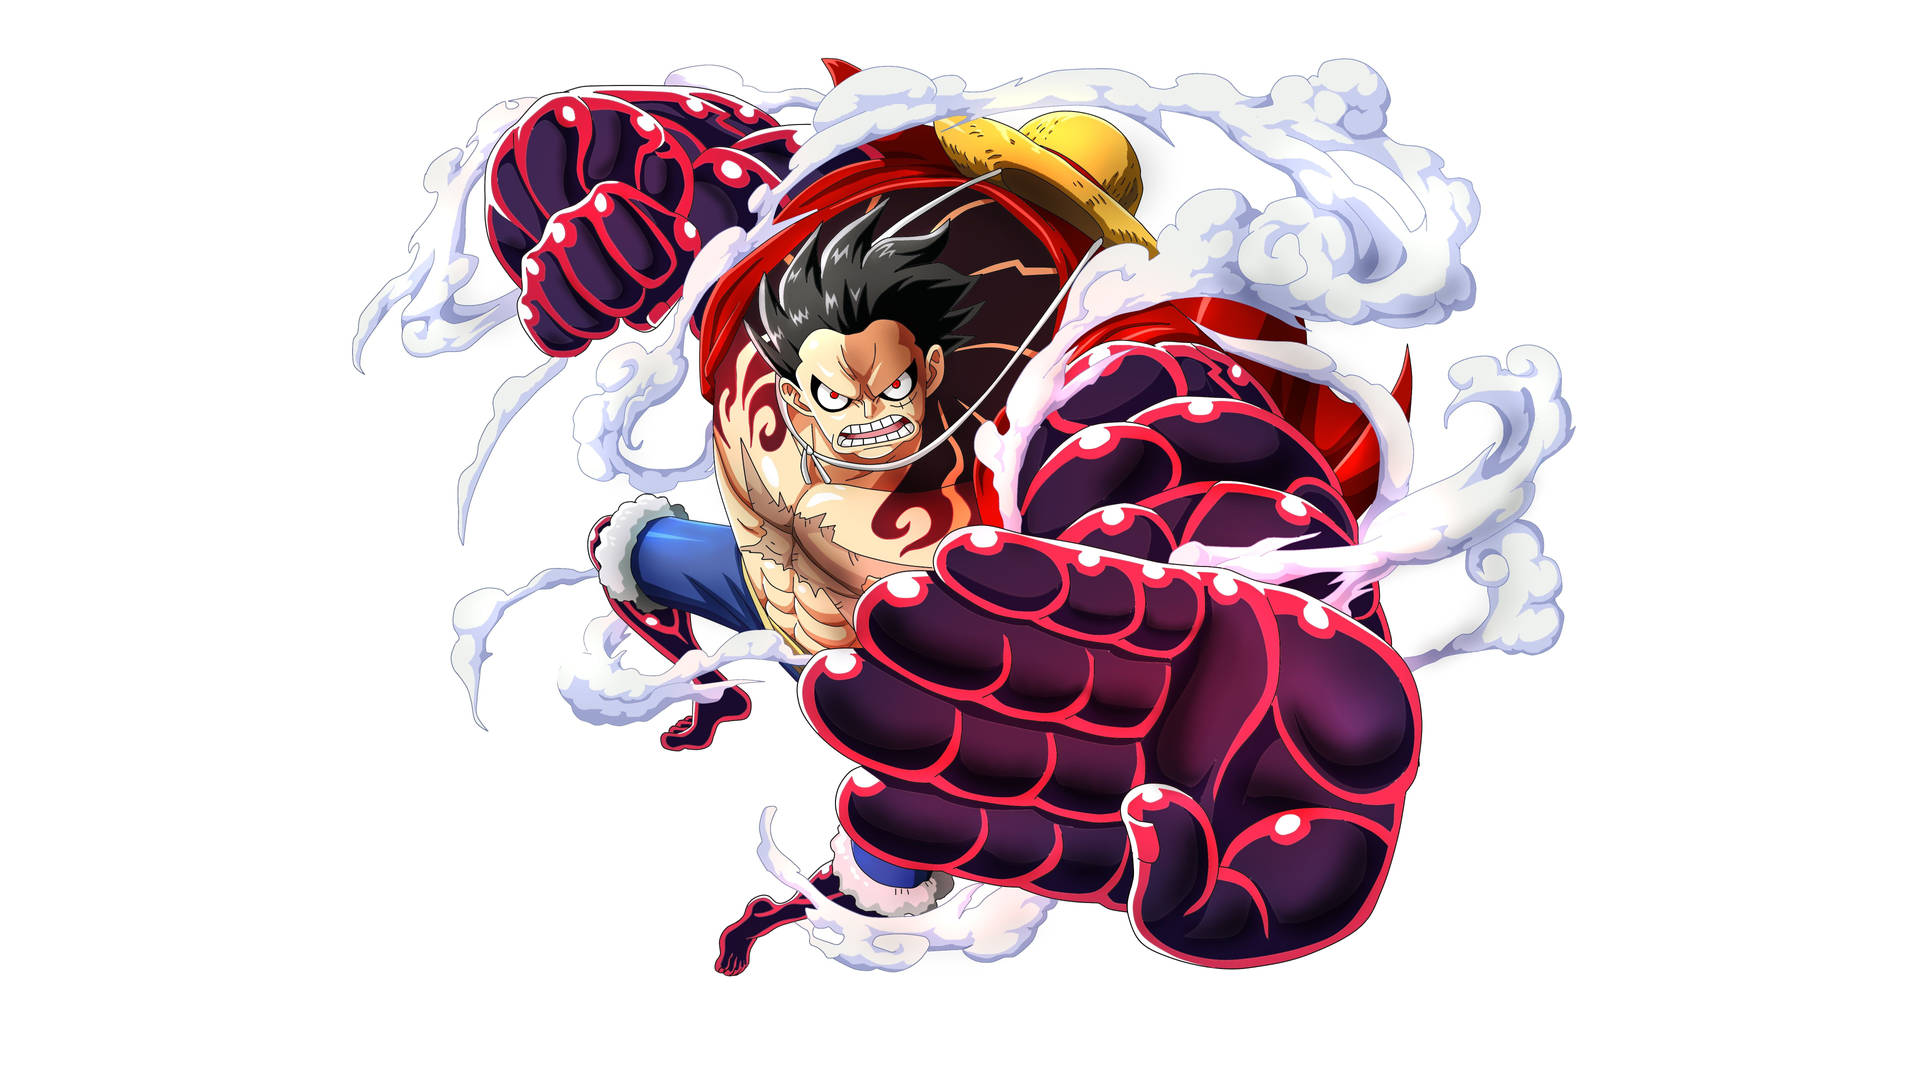 Bulky Luffy executing Gear Fourth technique in One Piece anime series wallpaper.